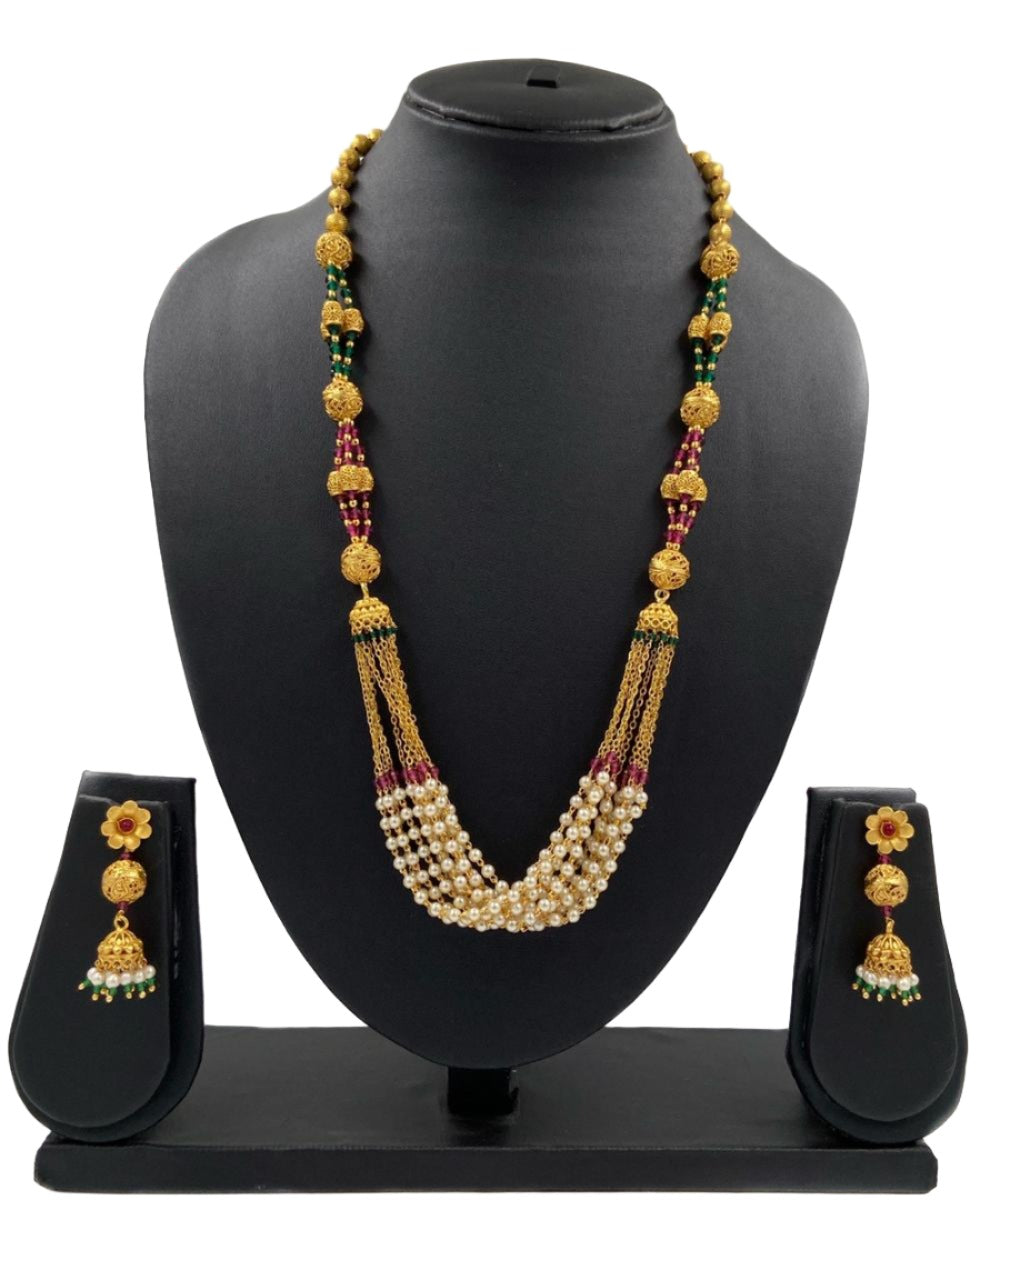 Designer Antique Gold Plated Long Golden Chains Pearls Beaded Necklace Set For Woman Golden Beads Jewellery